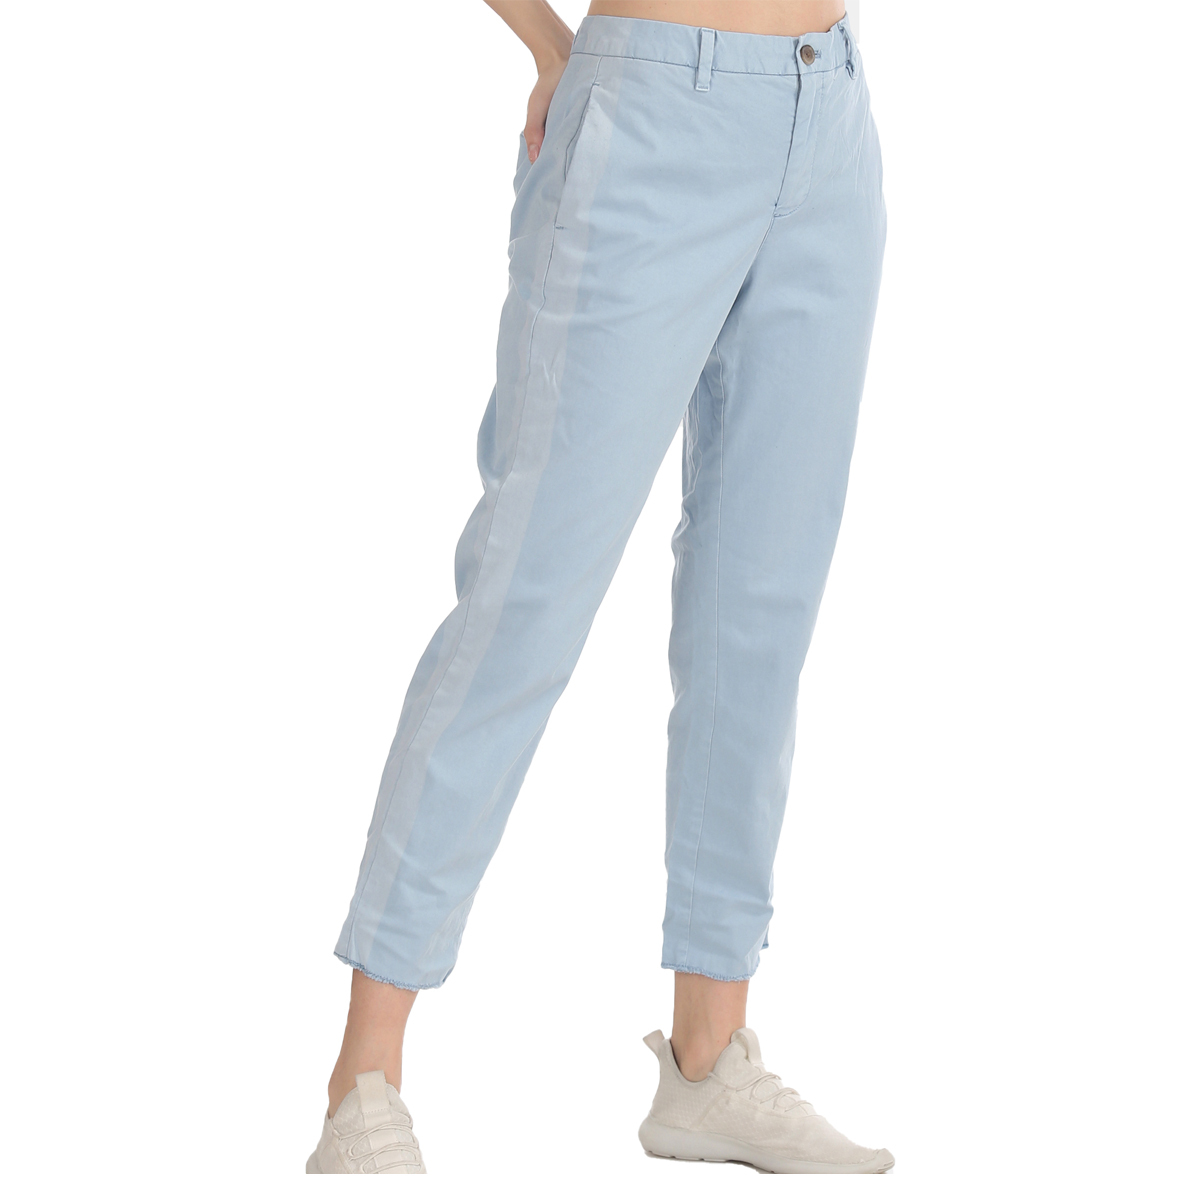 Gap Mid Rise Girlfriend Fit Solid Color Trouser Styled with Raw Hem & Faded Side Seam Line - Blue, Size-8